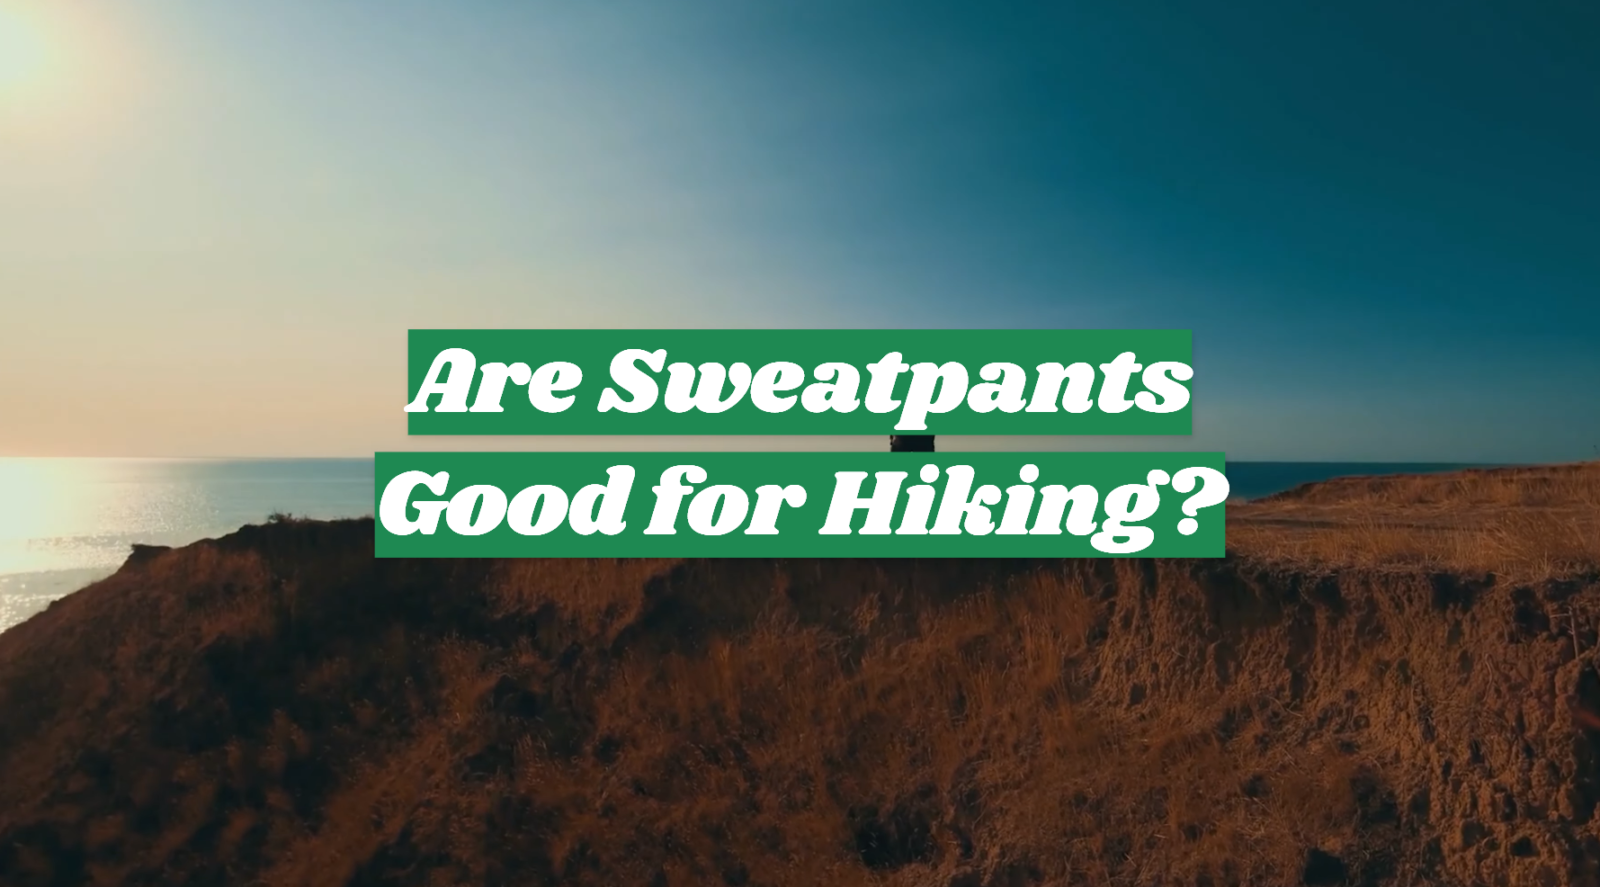 Are Sweatpants Good for Hiking?